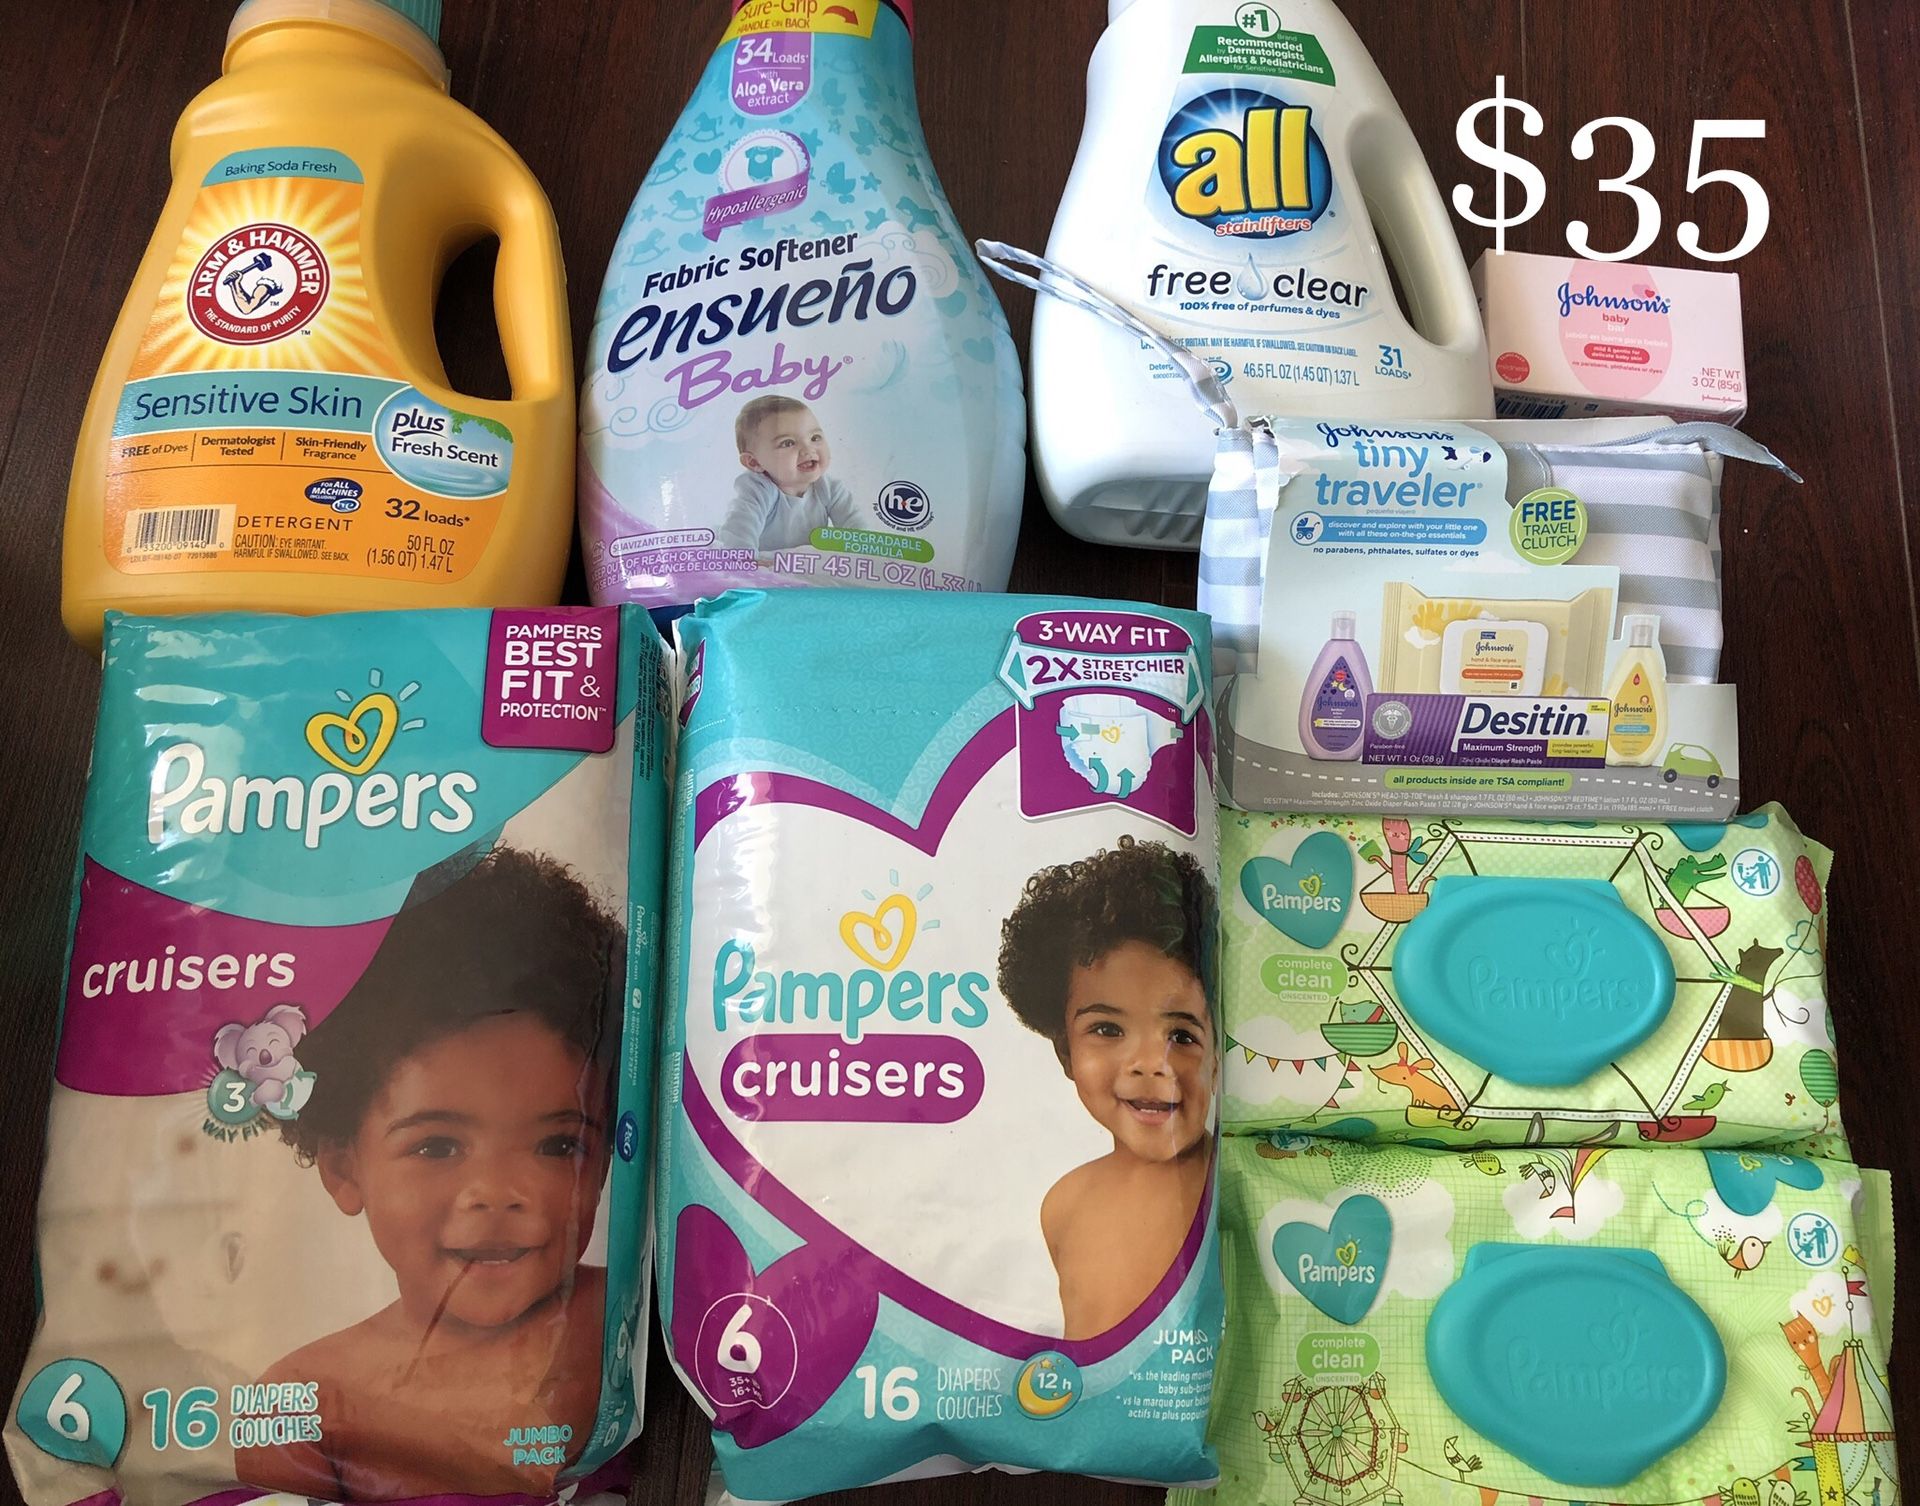 2 PAMPERS Diapers, 1 Arm & Hammer & 1 All Laundry Soap; 1 Johnson Baby Traveler kit, 1 Johnson Baby Bath Soap, 1 Softener, 2 Baby Wipes: 9 items $35